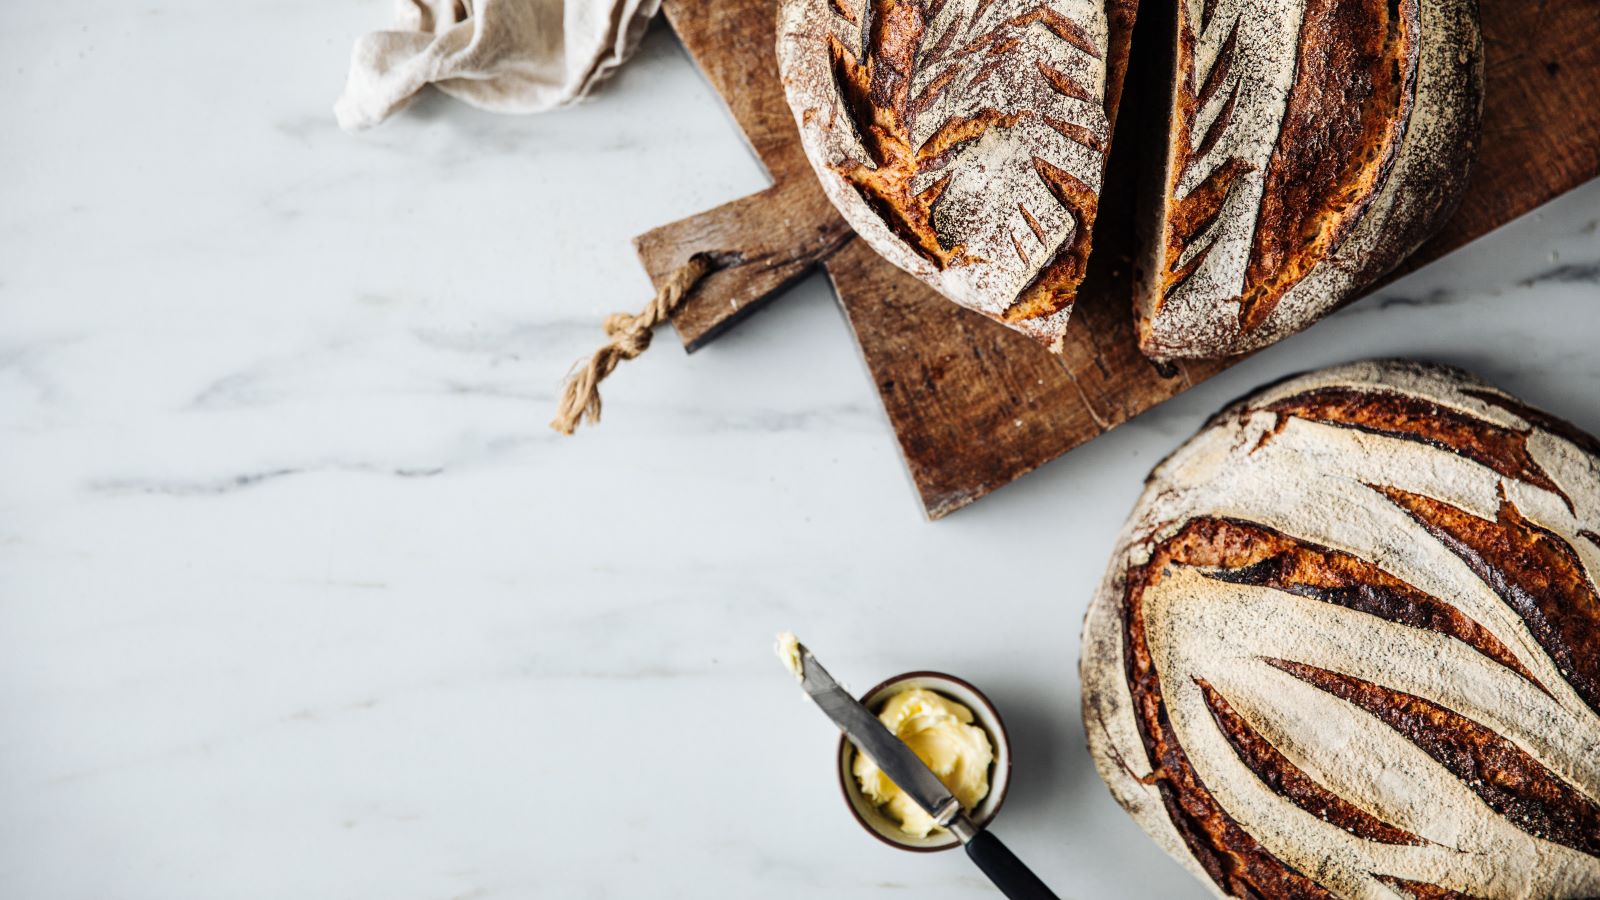 From pumpernickel to sourdough, bread is a staple in any household. But are some types of bread more healthy than others?